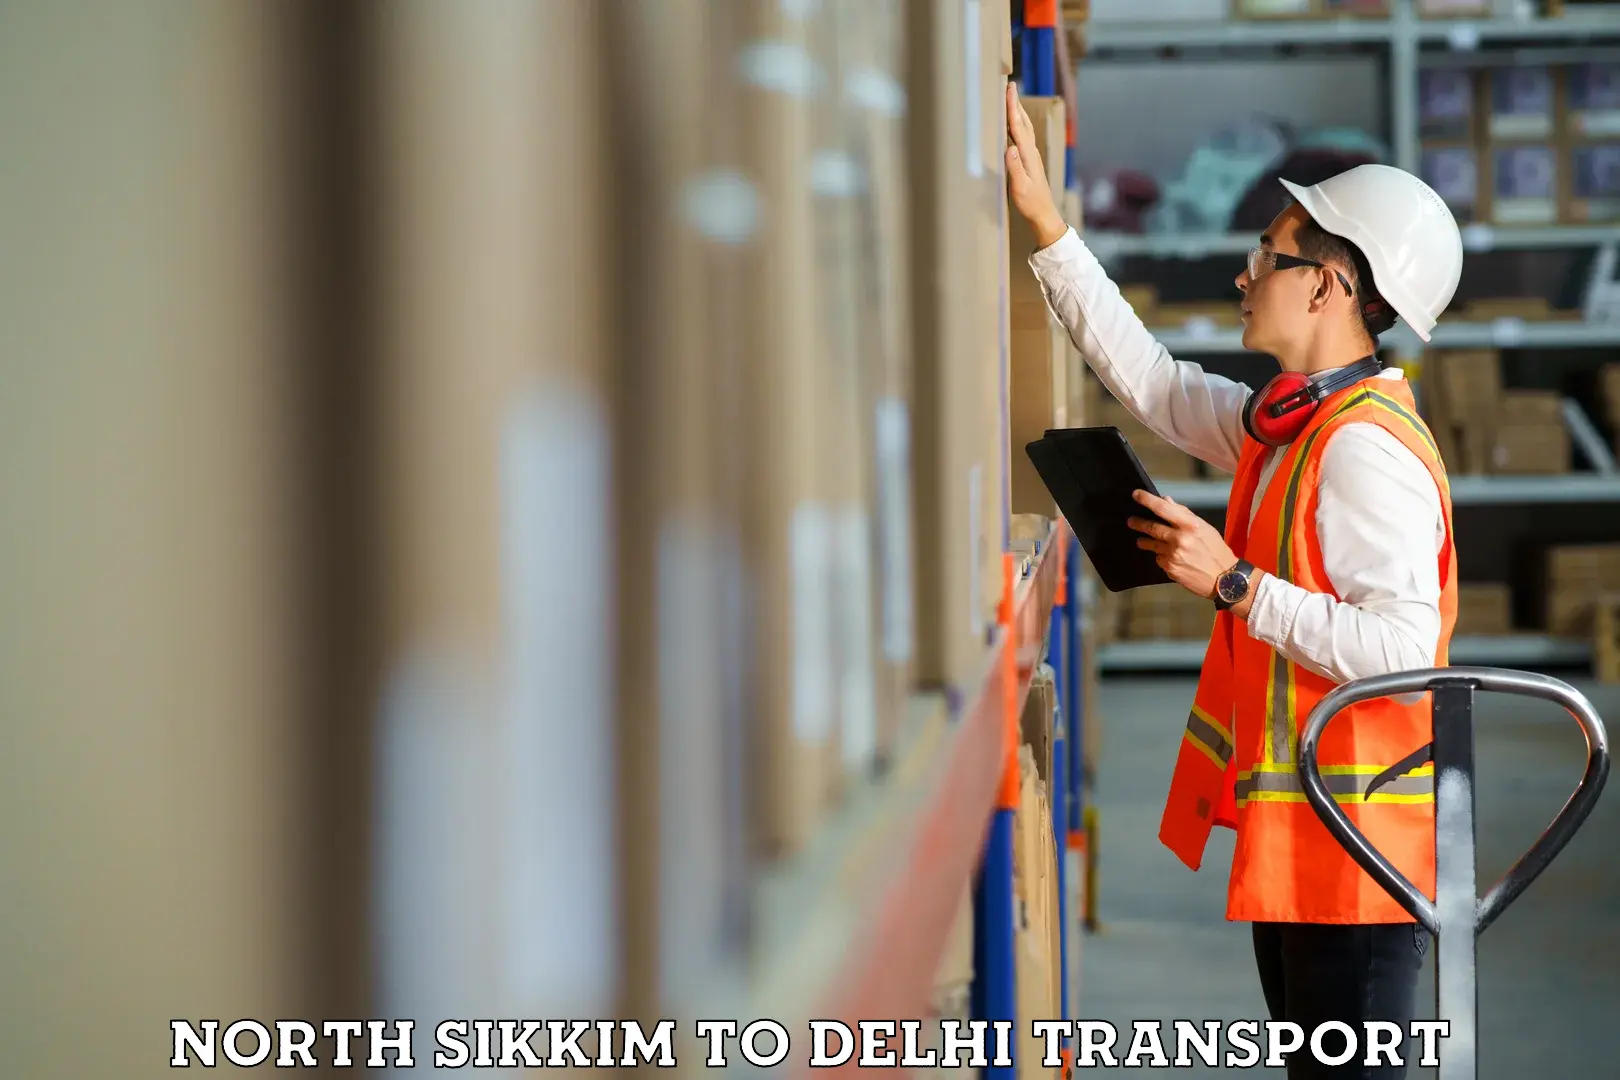 Container transport service North Sikkim to NCR